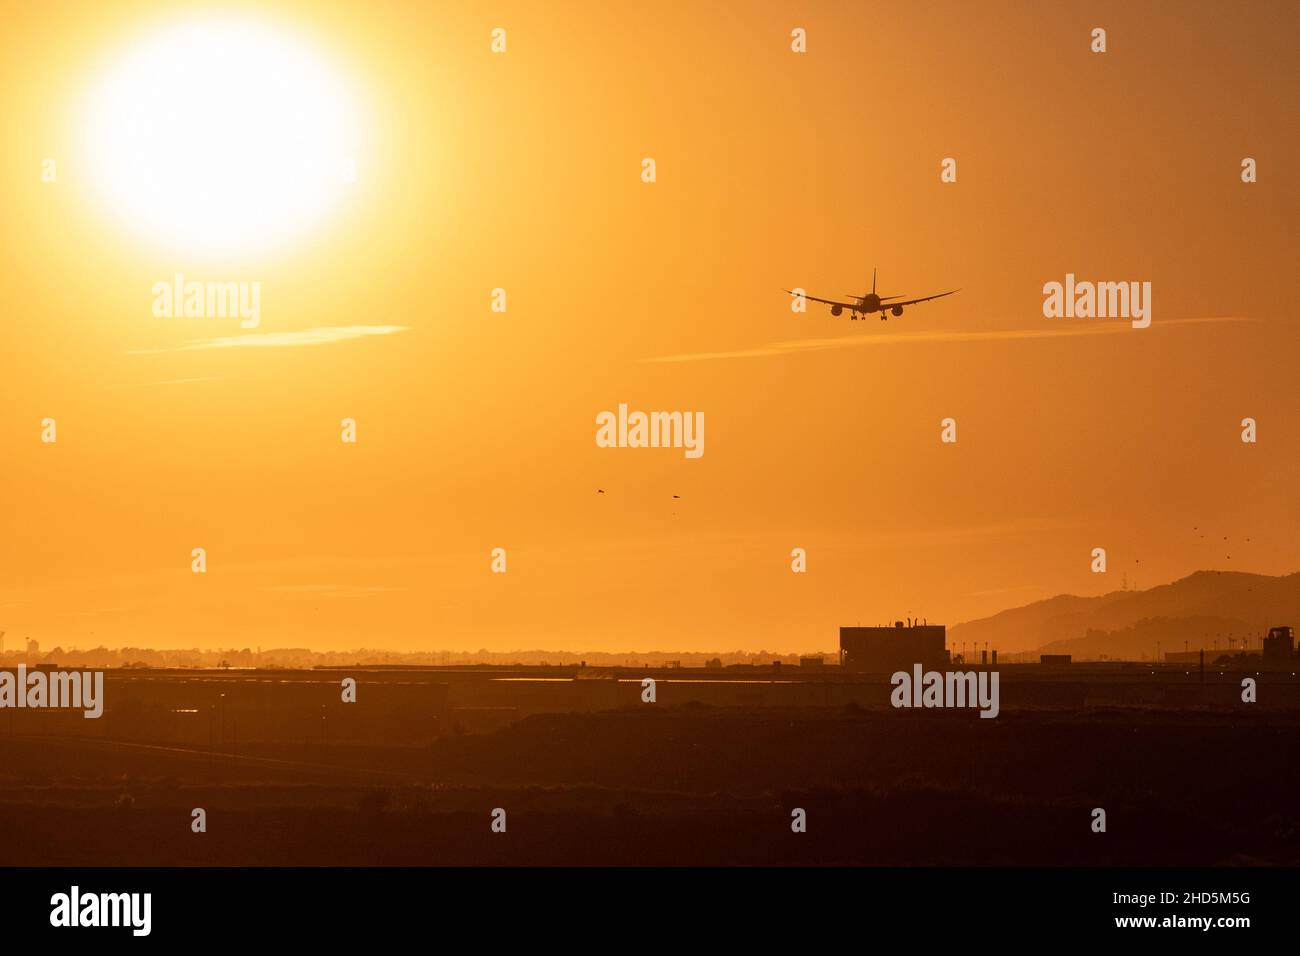 Twin engined jet landing in Barcelona Airport at sunset, grainy shot with birds. Spain Stock Photo